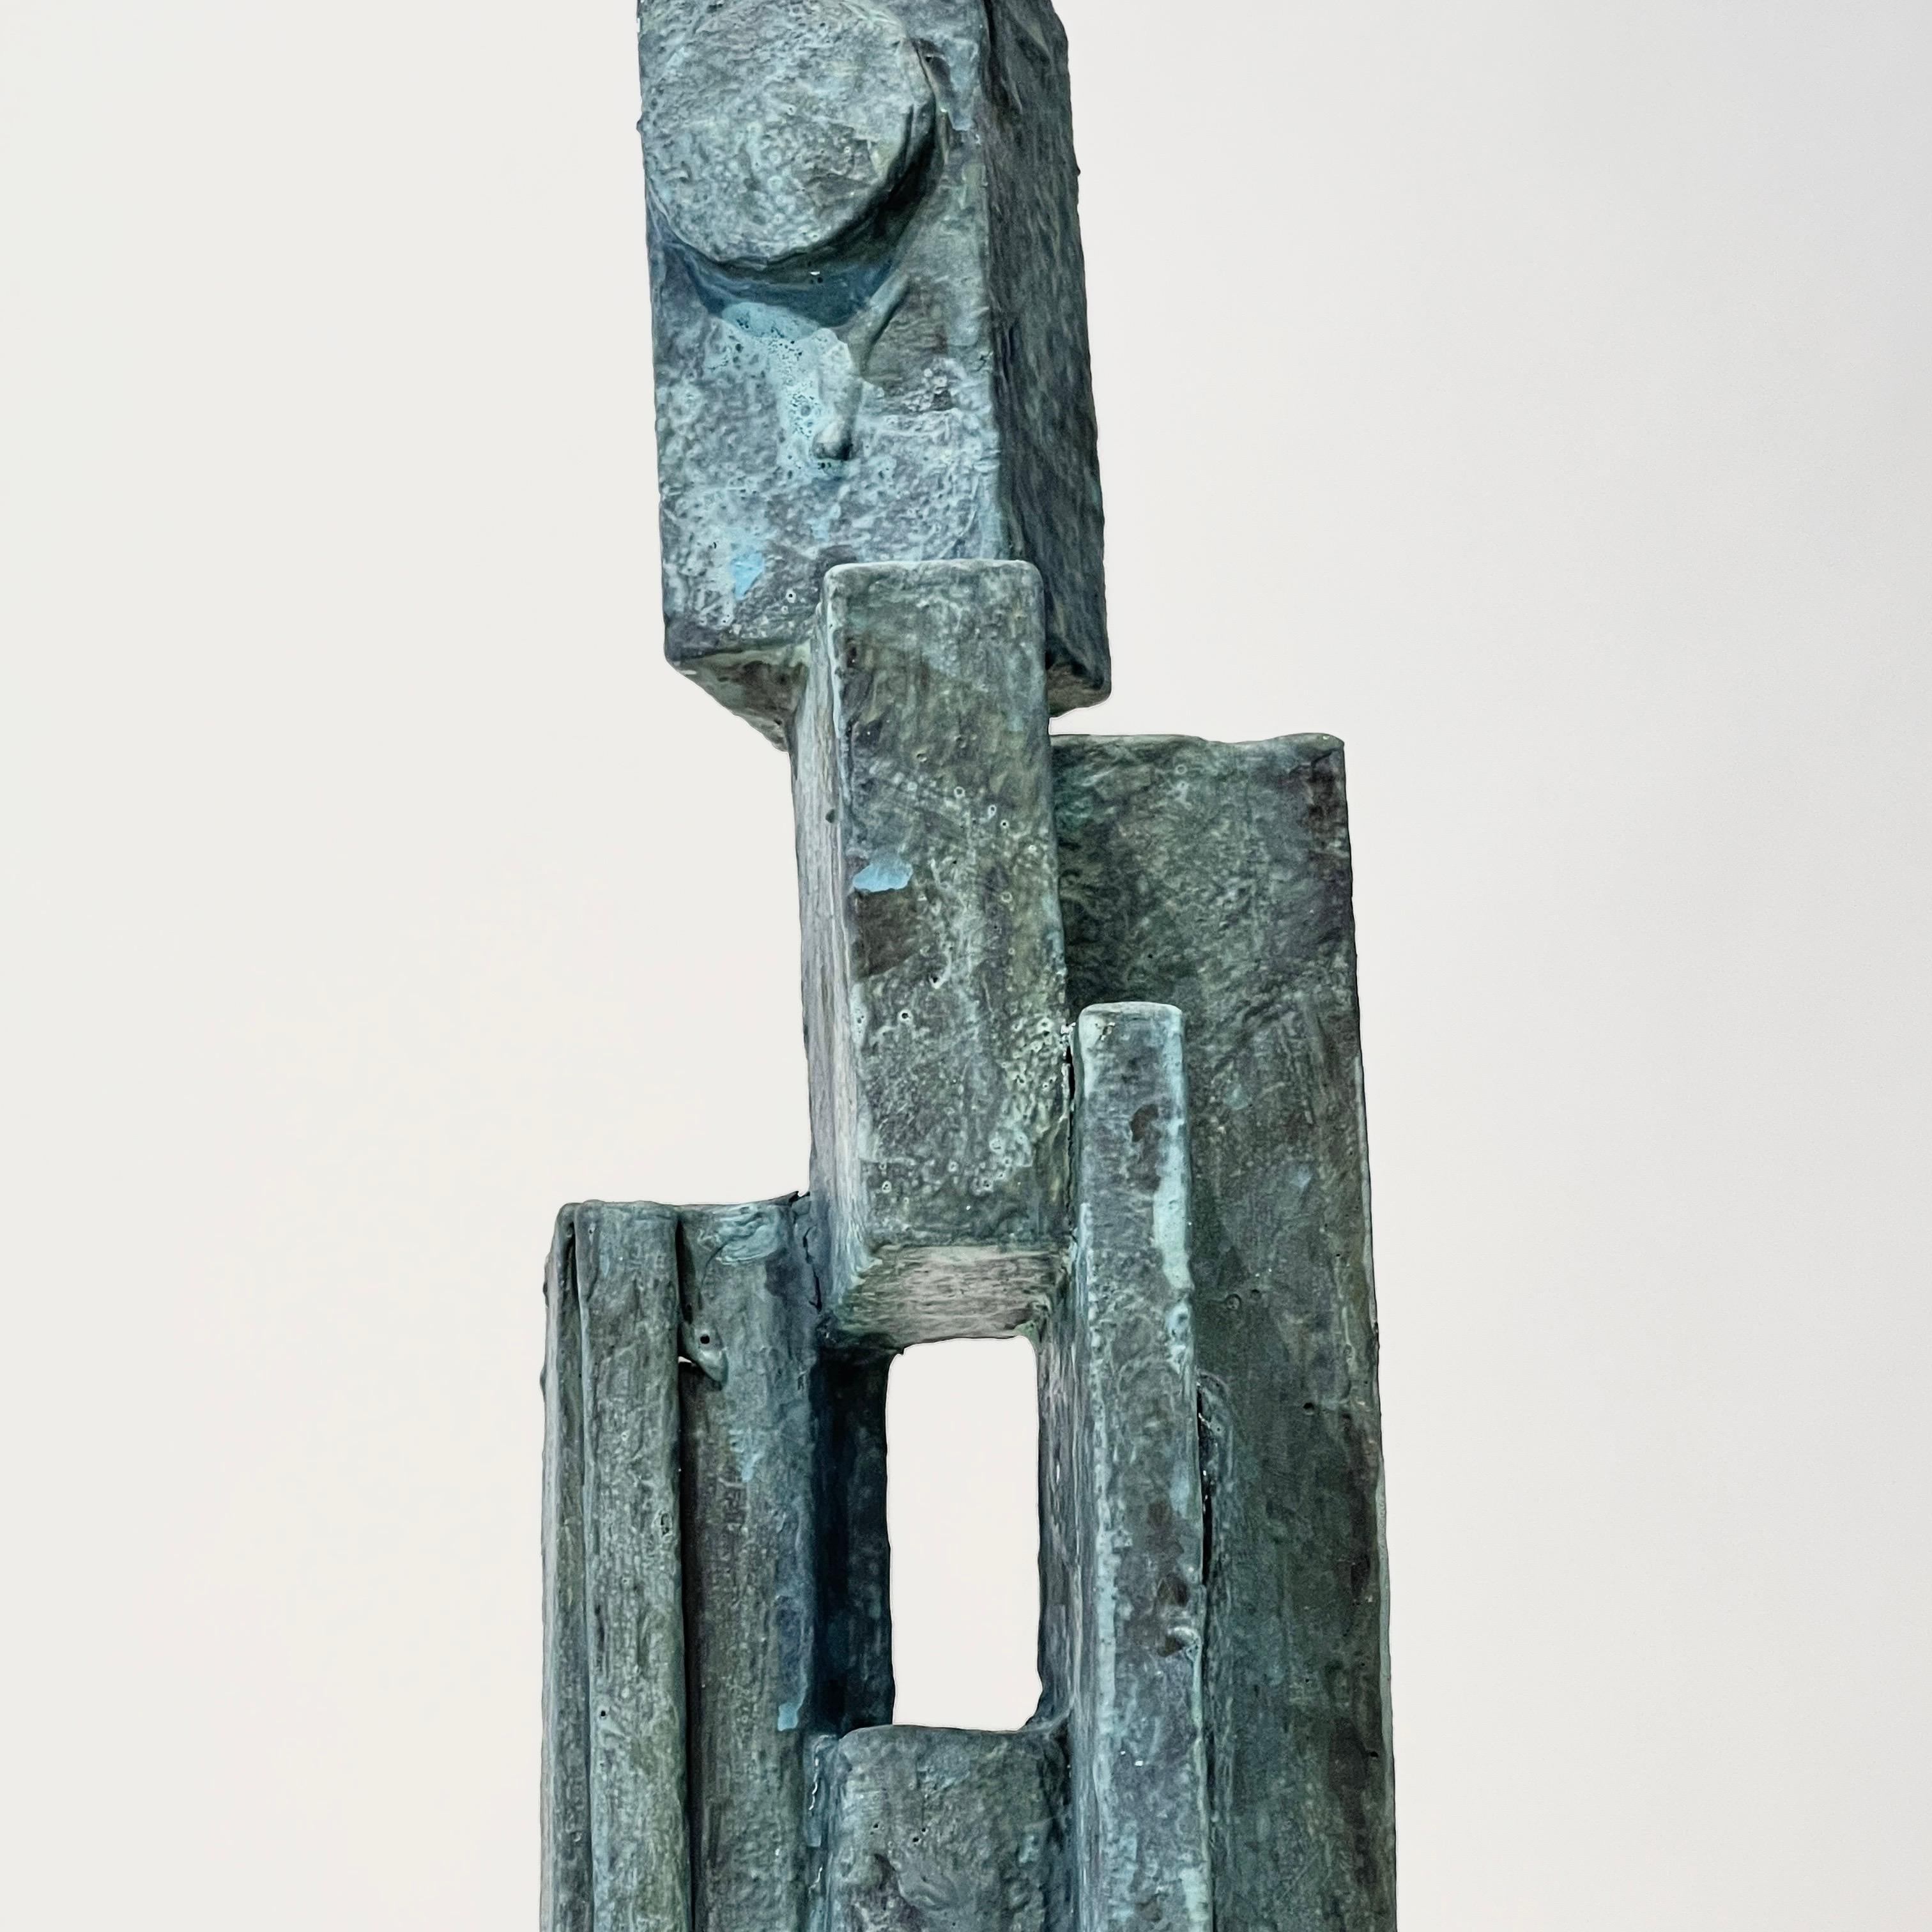 Cubist abstract mixed-media sculpture was created using various materials including wood, papier-mache, and paint. Beautiful weathered bronze verdigris effect surface.